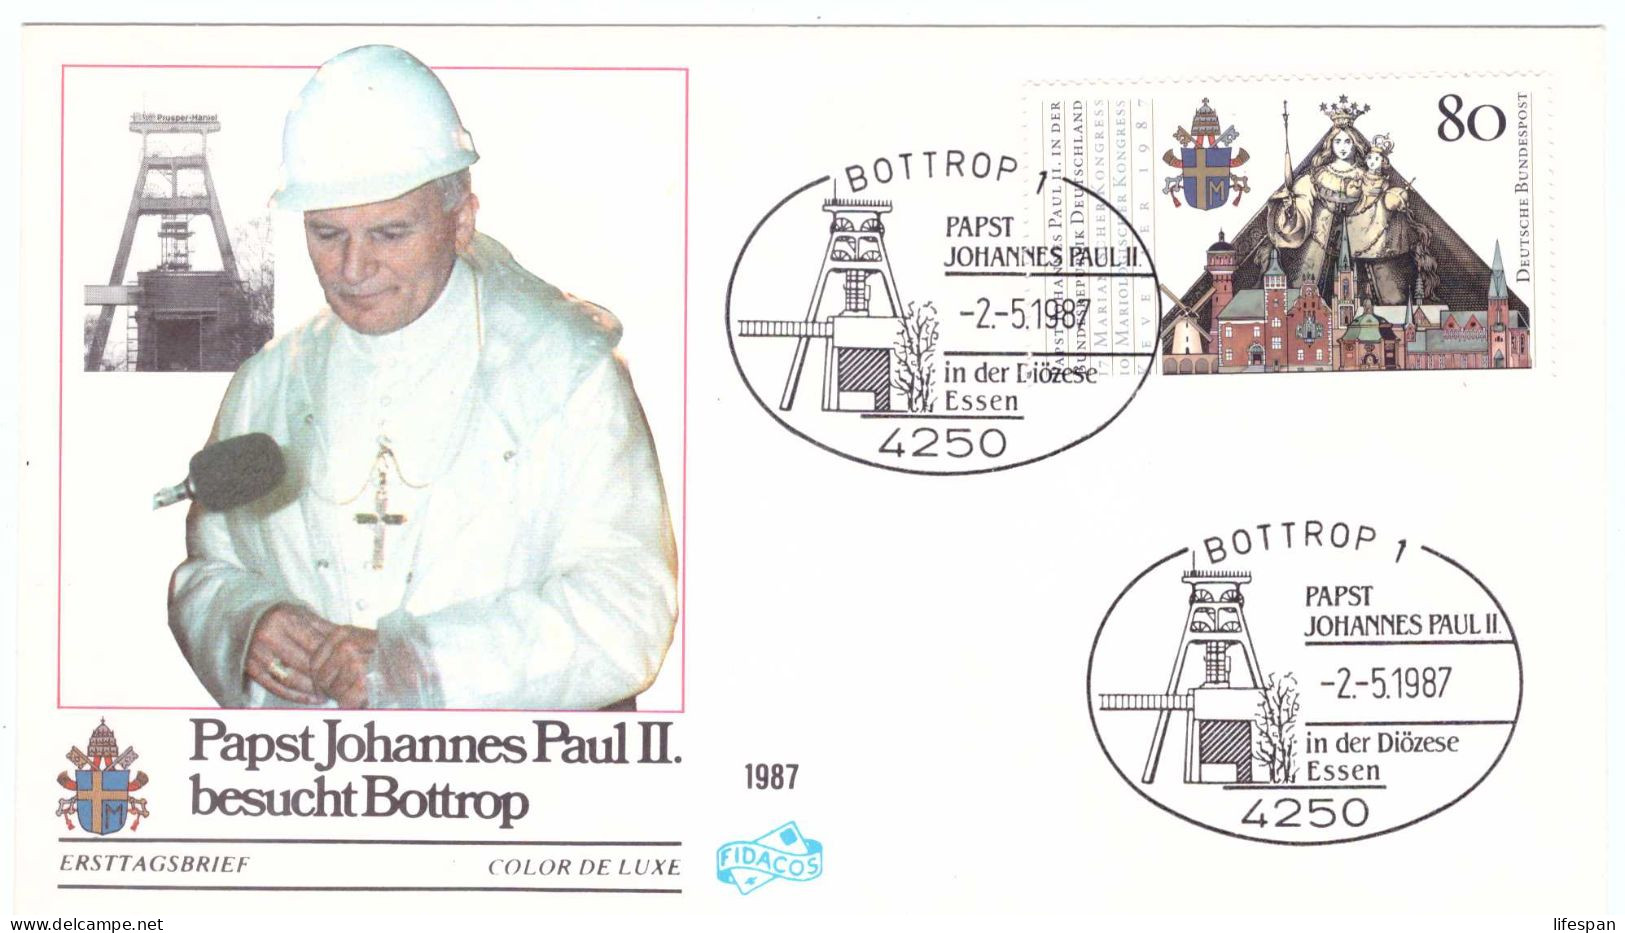 F1 LOT 11 envelopes with Pope Paul II - ask for discount